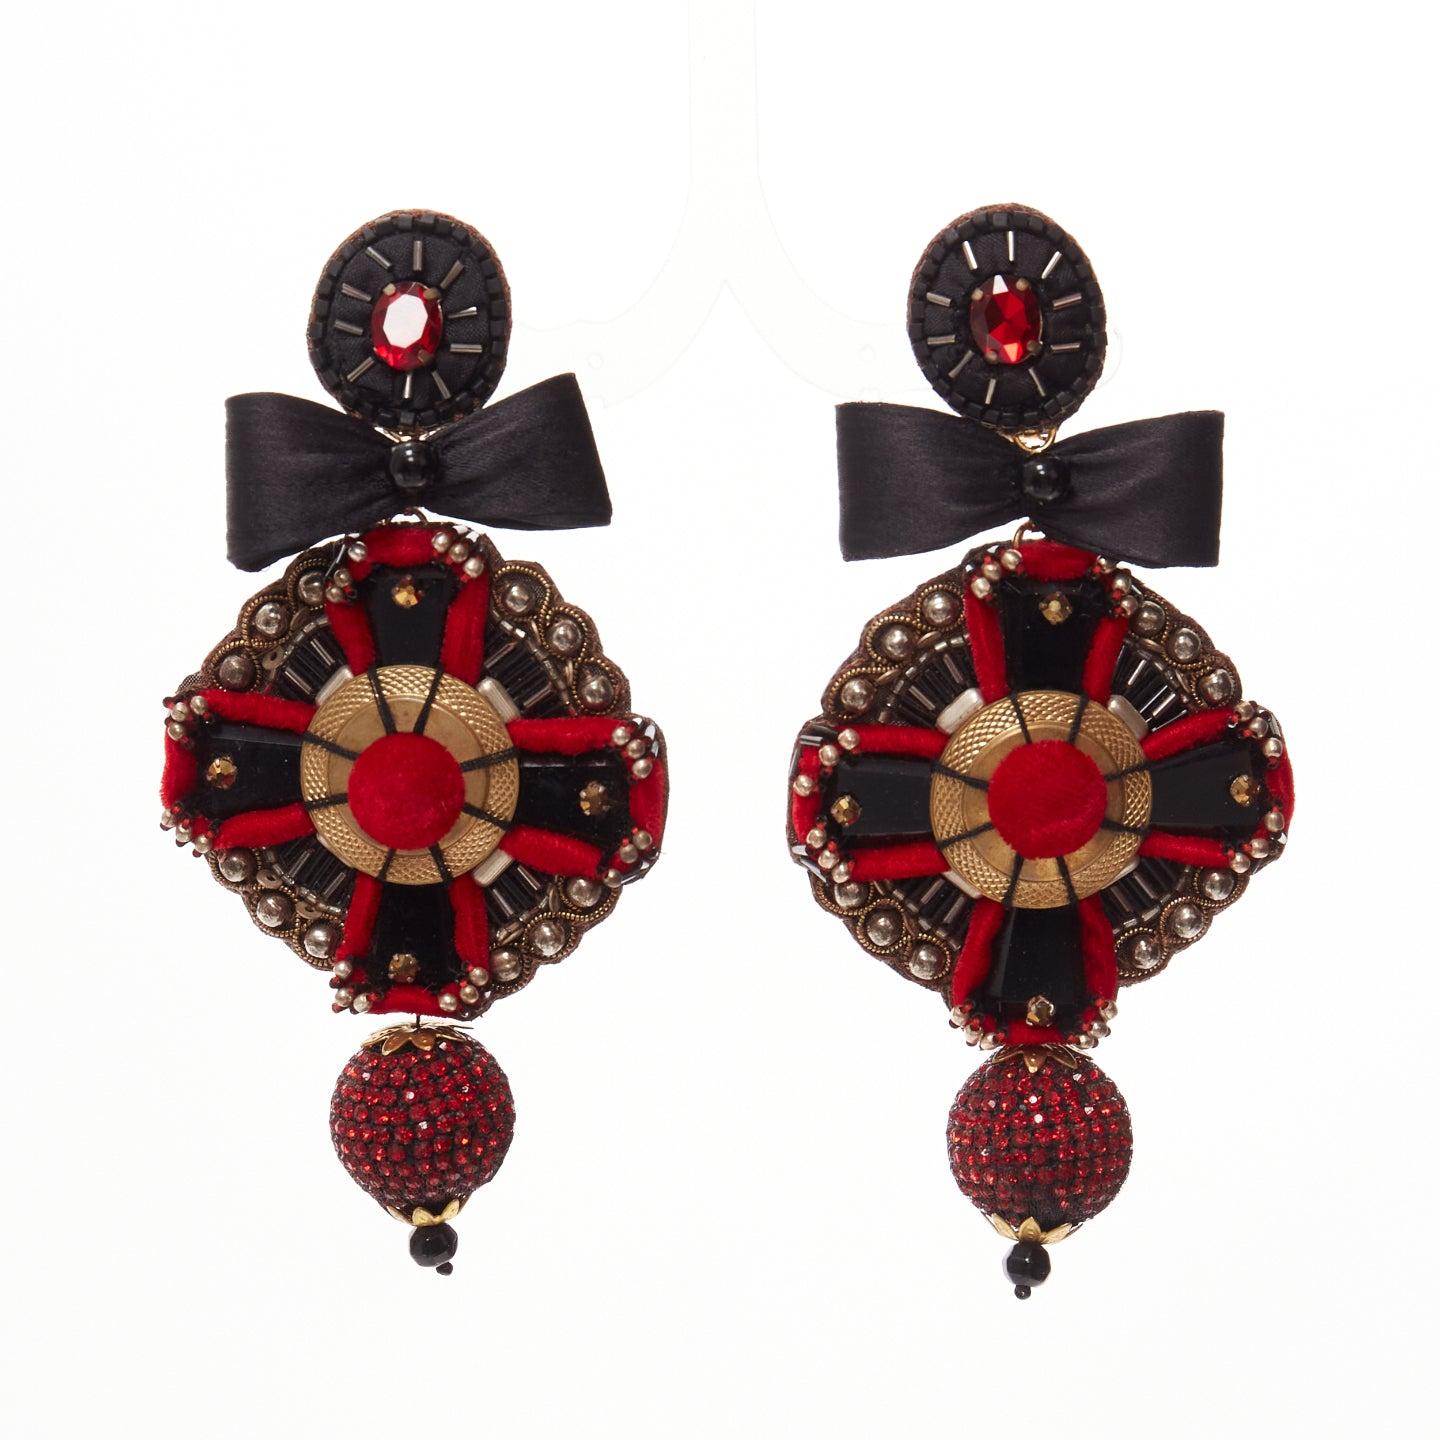 RANJANA KHAN red black ethnic bow crystal ball dangling clip on earrings
Reference: AAWC/A01217
Brand: Ranjana Khan
Material: Fabric
Color: Red, Black
Pattern: Solid
Closure: Clip On
Lining: Black Leather
Extra Details: Black leather